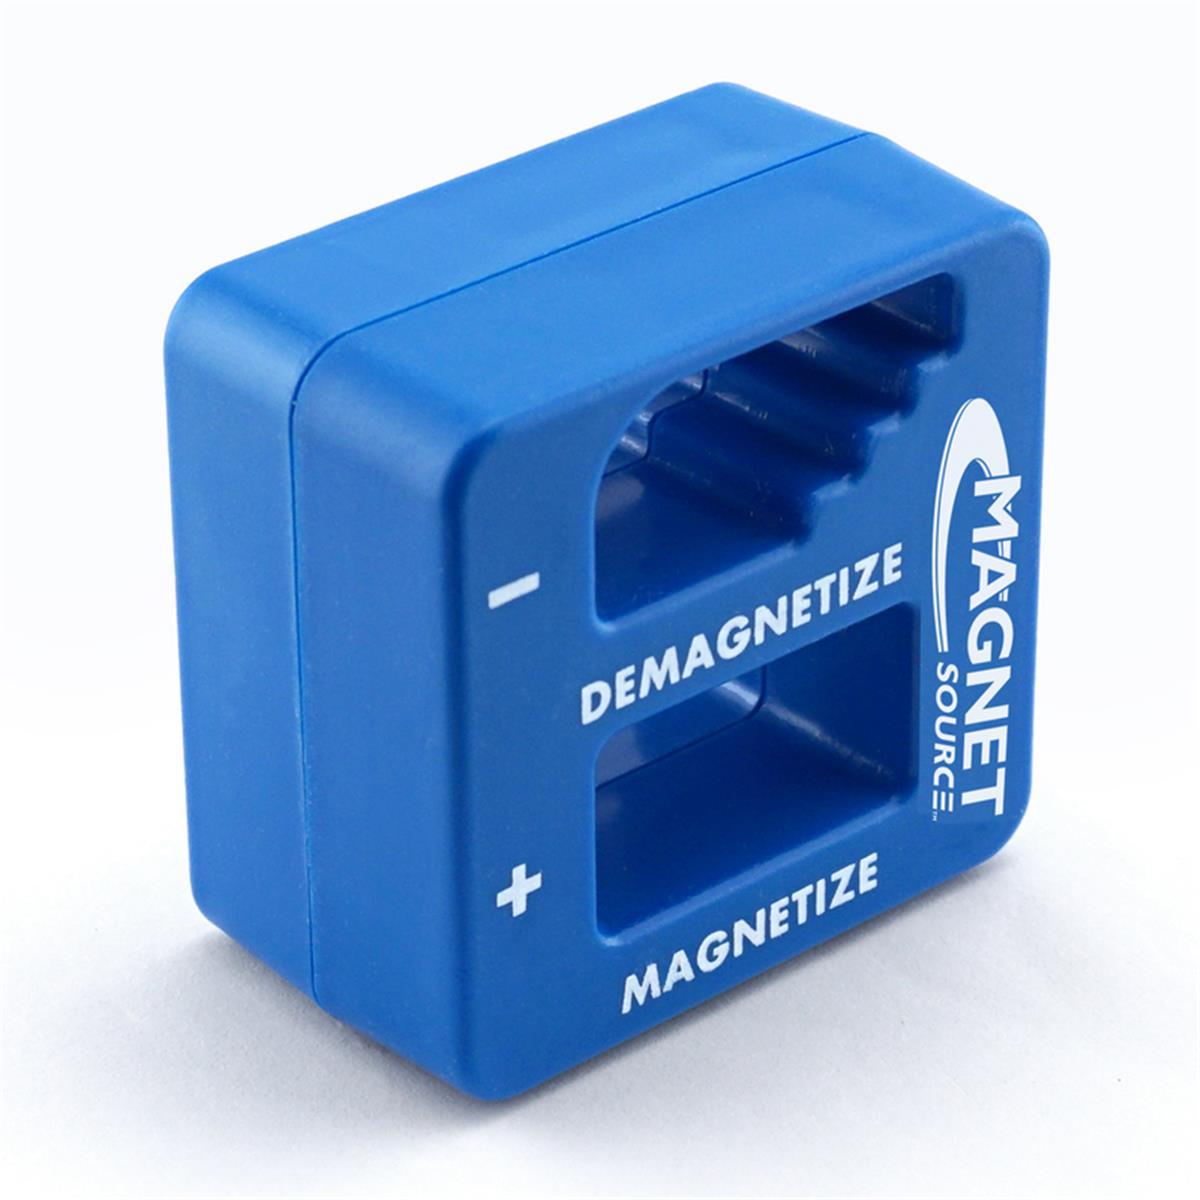 Picture of Master Magnetics 2500825 Magnetize & Demagnetize for Small Tool